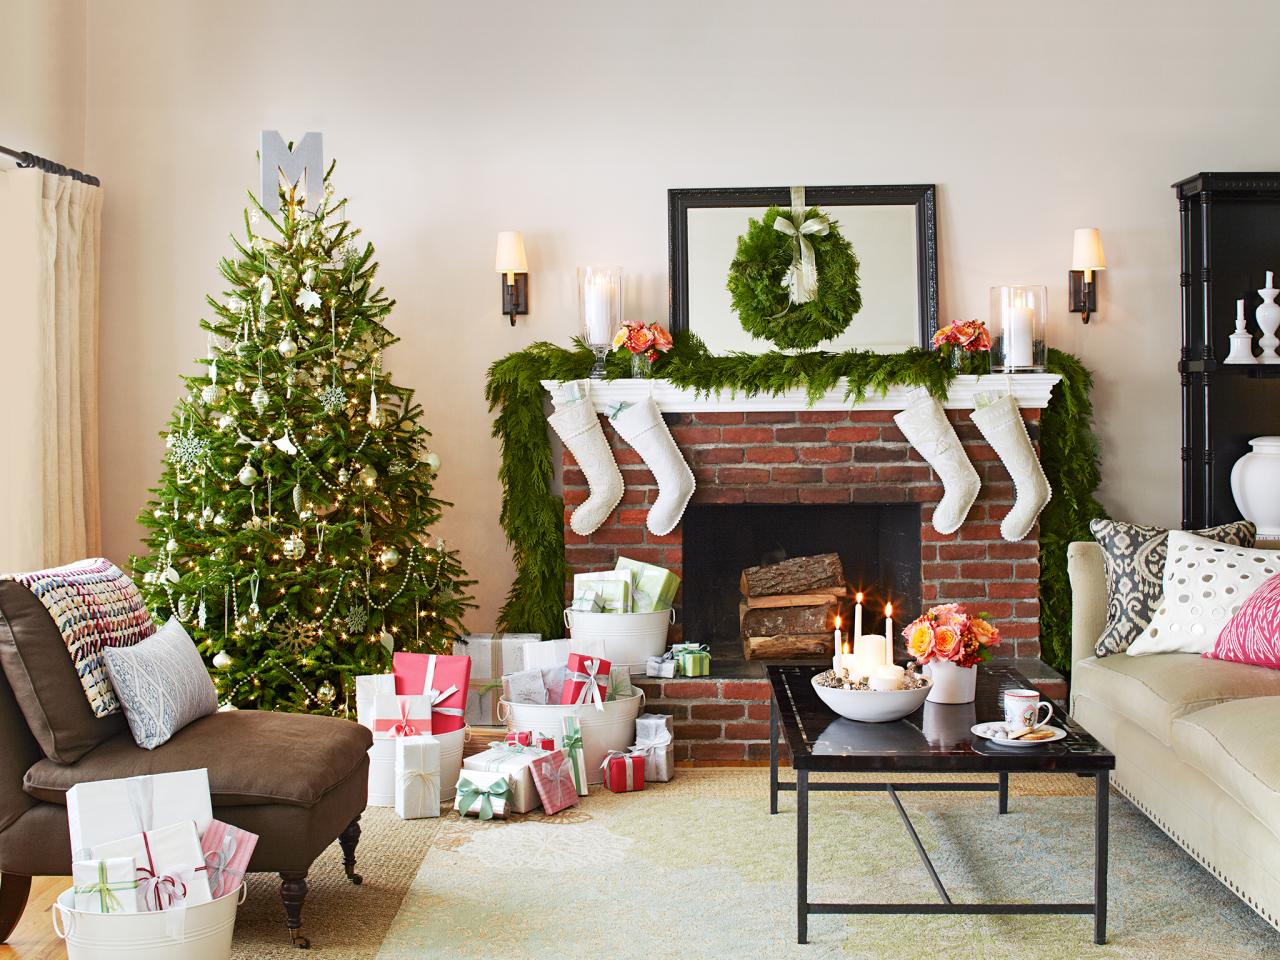 How To Decorate Fireplace For Christmas